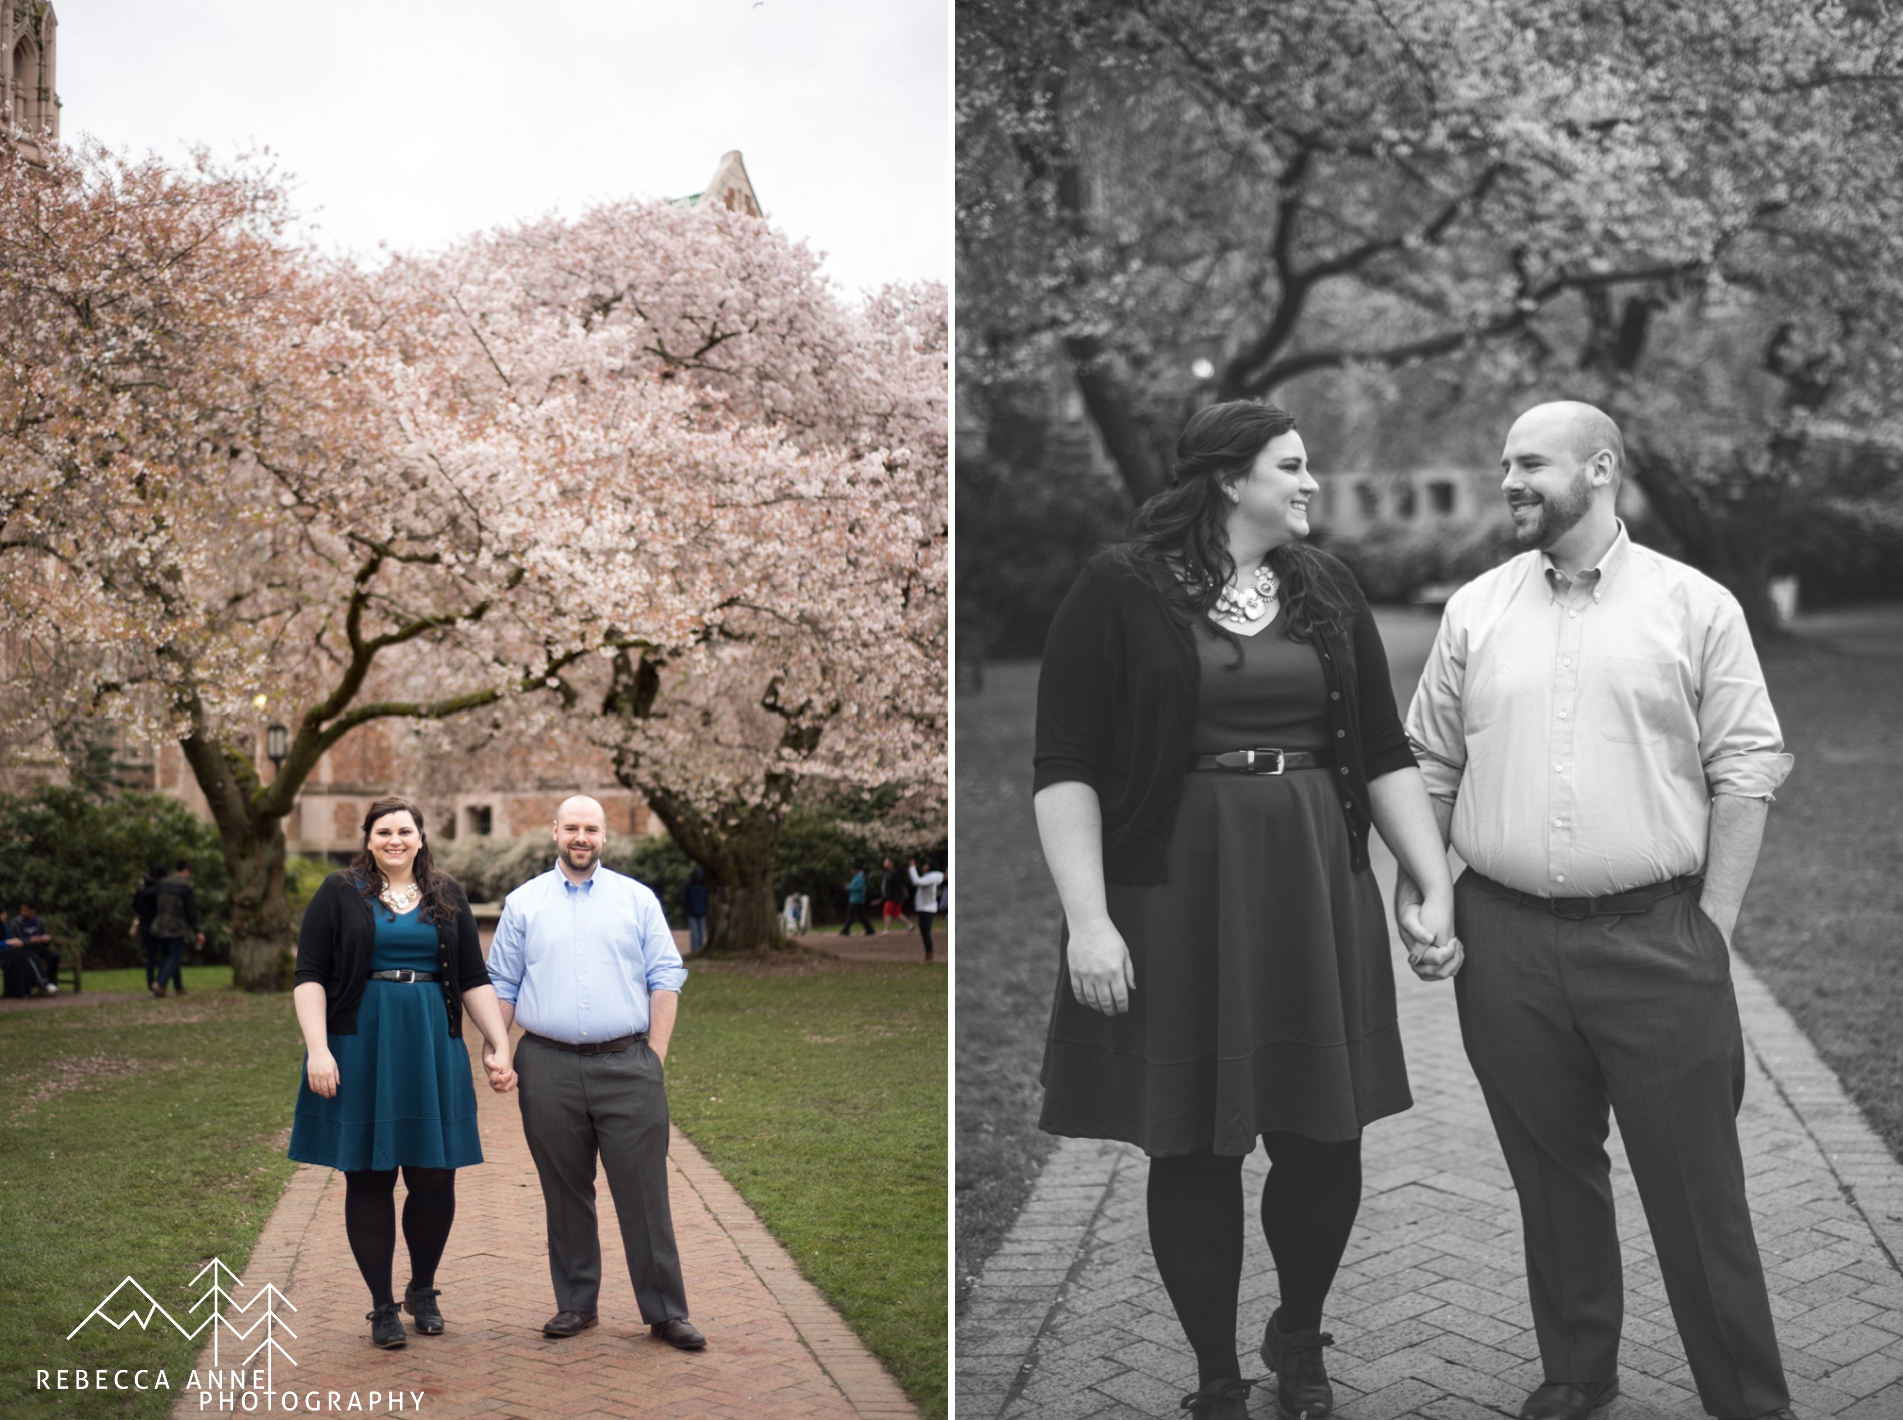 Engagement session at the University of Washington Cherry Blossoms